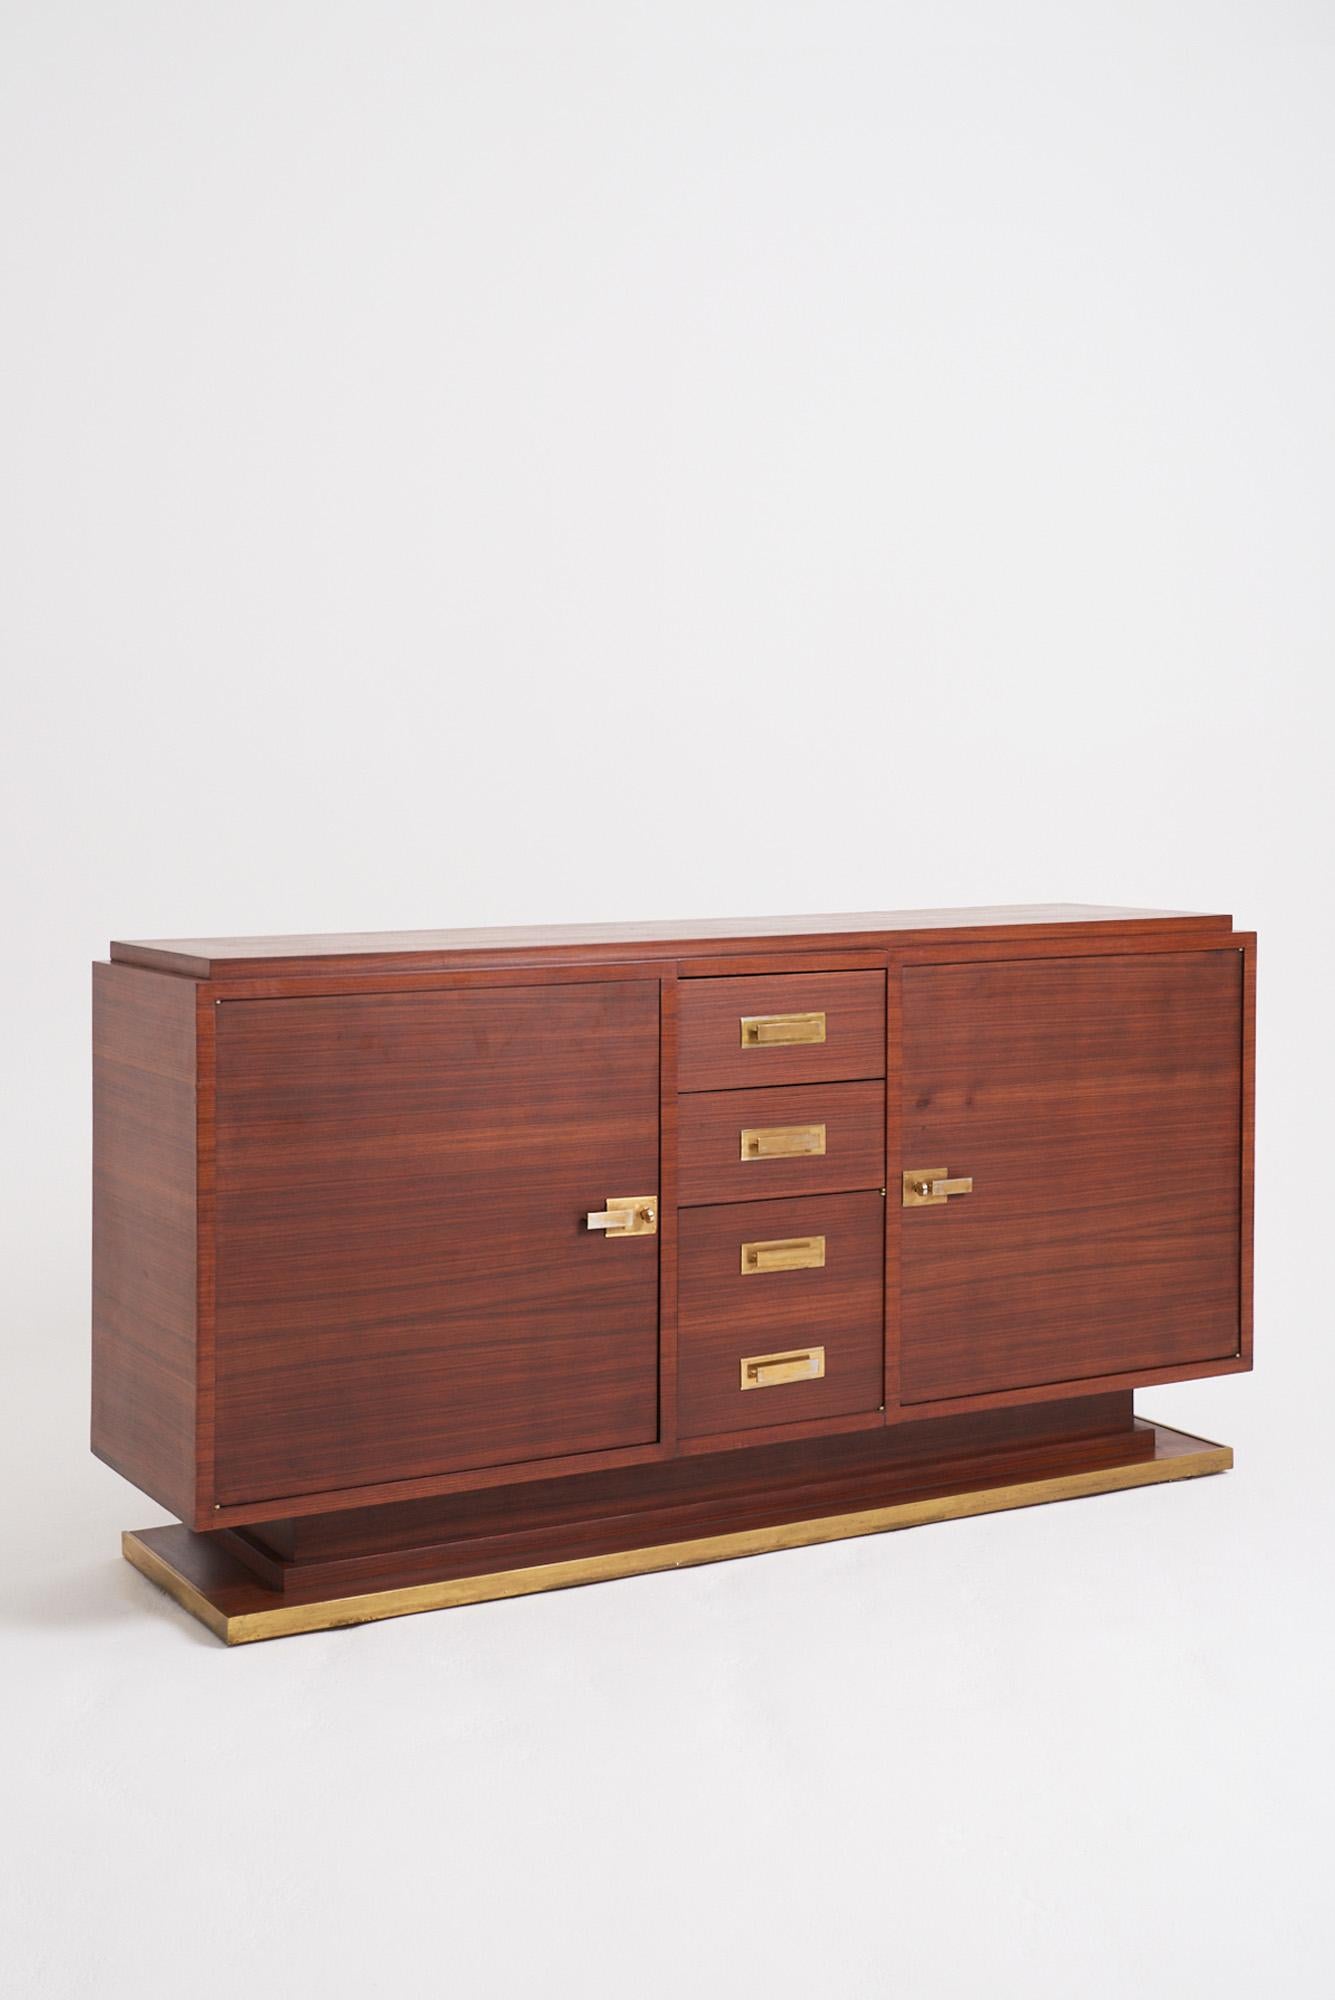 Art Deco Mahogany Sideboard In Good Condition For Sale In London, GB